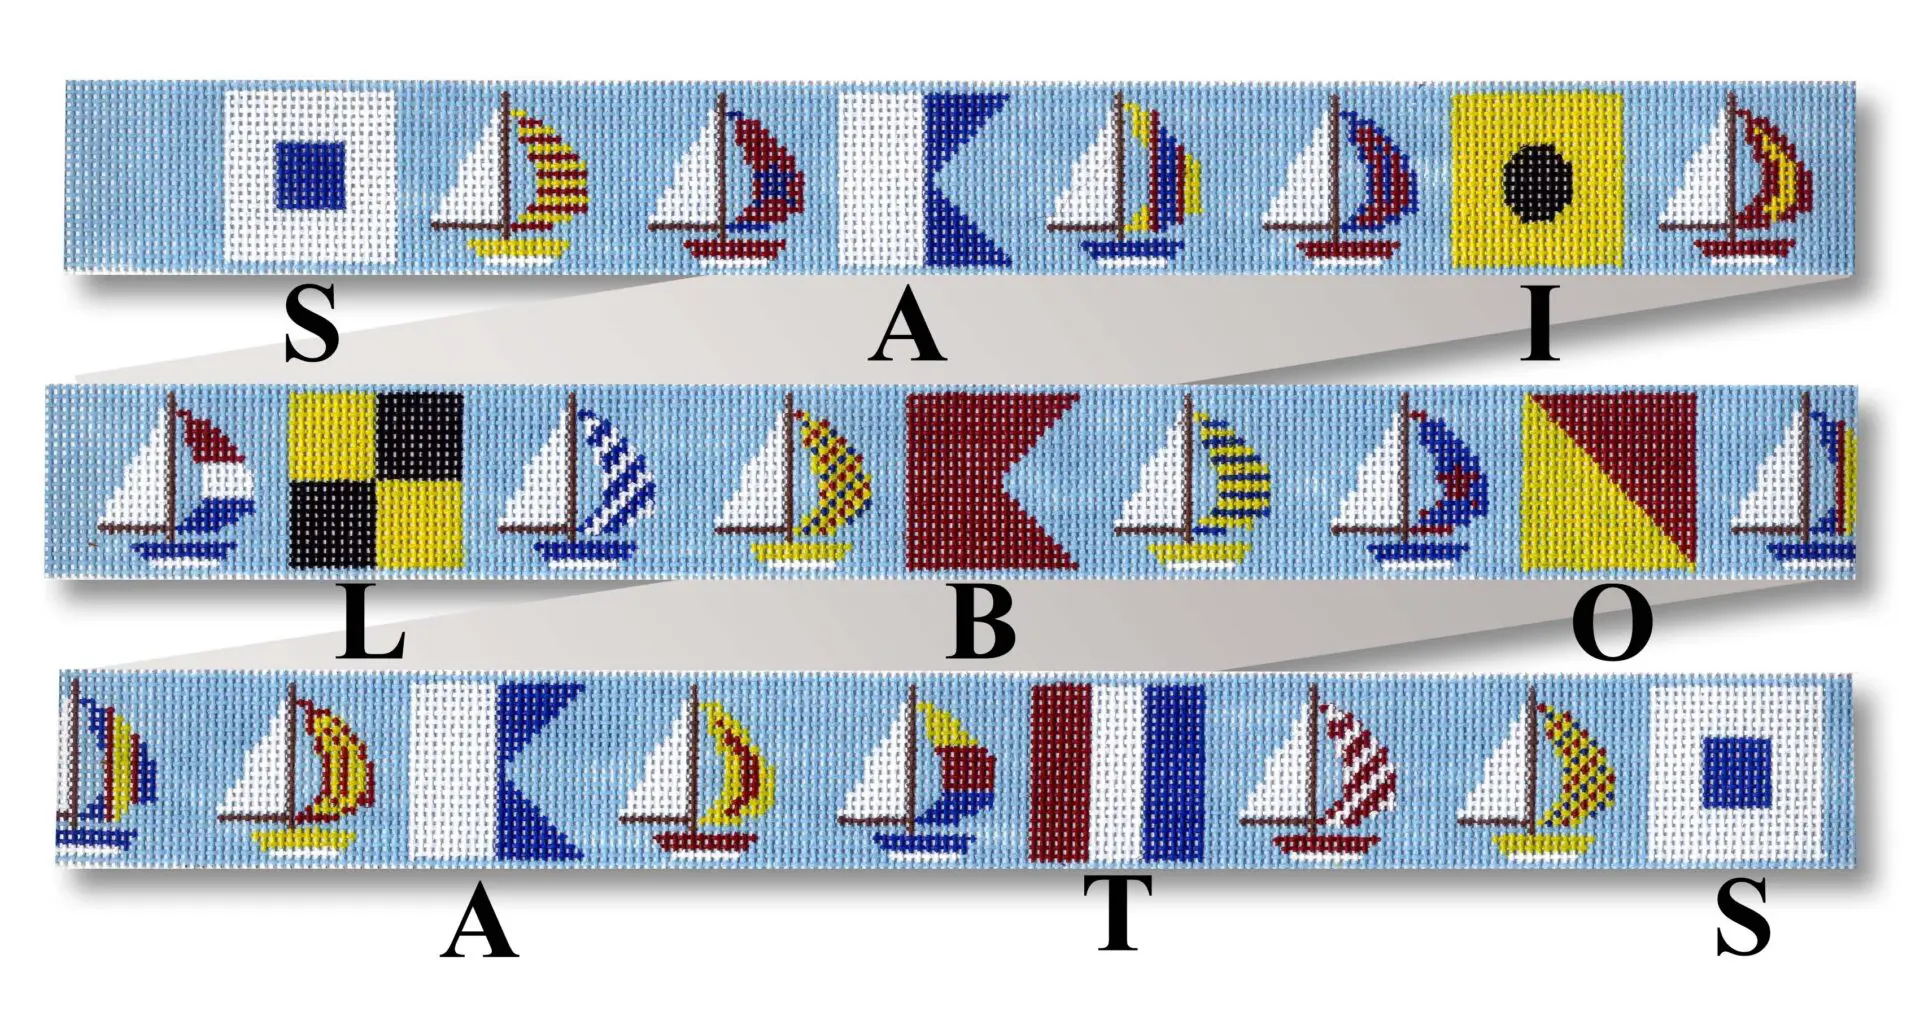 A blue ribbon with sailboats on it.